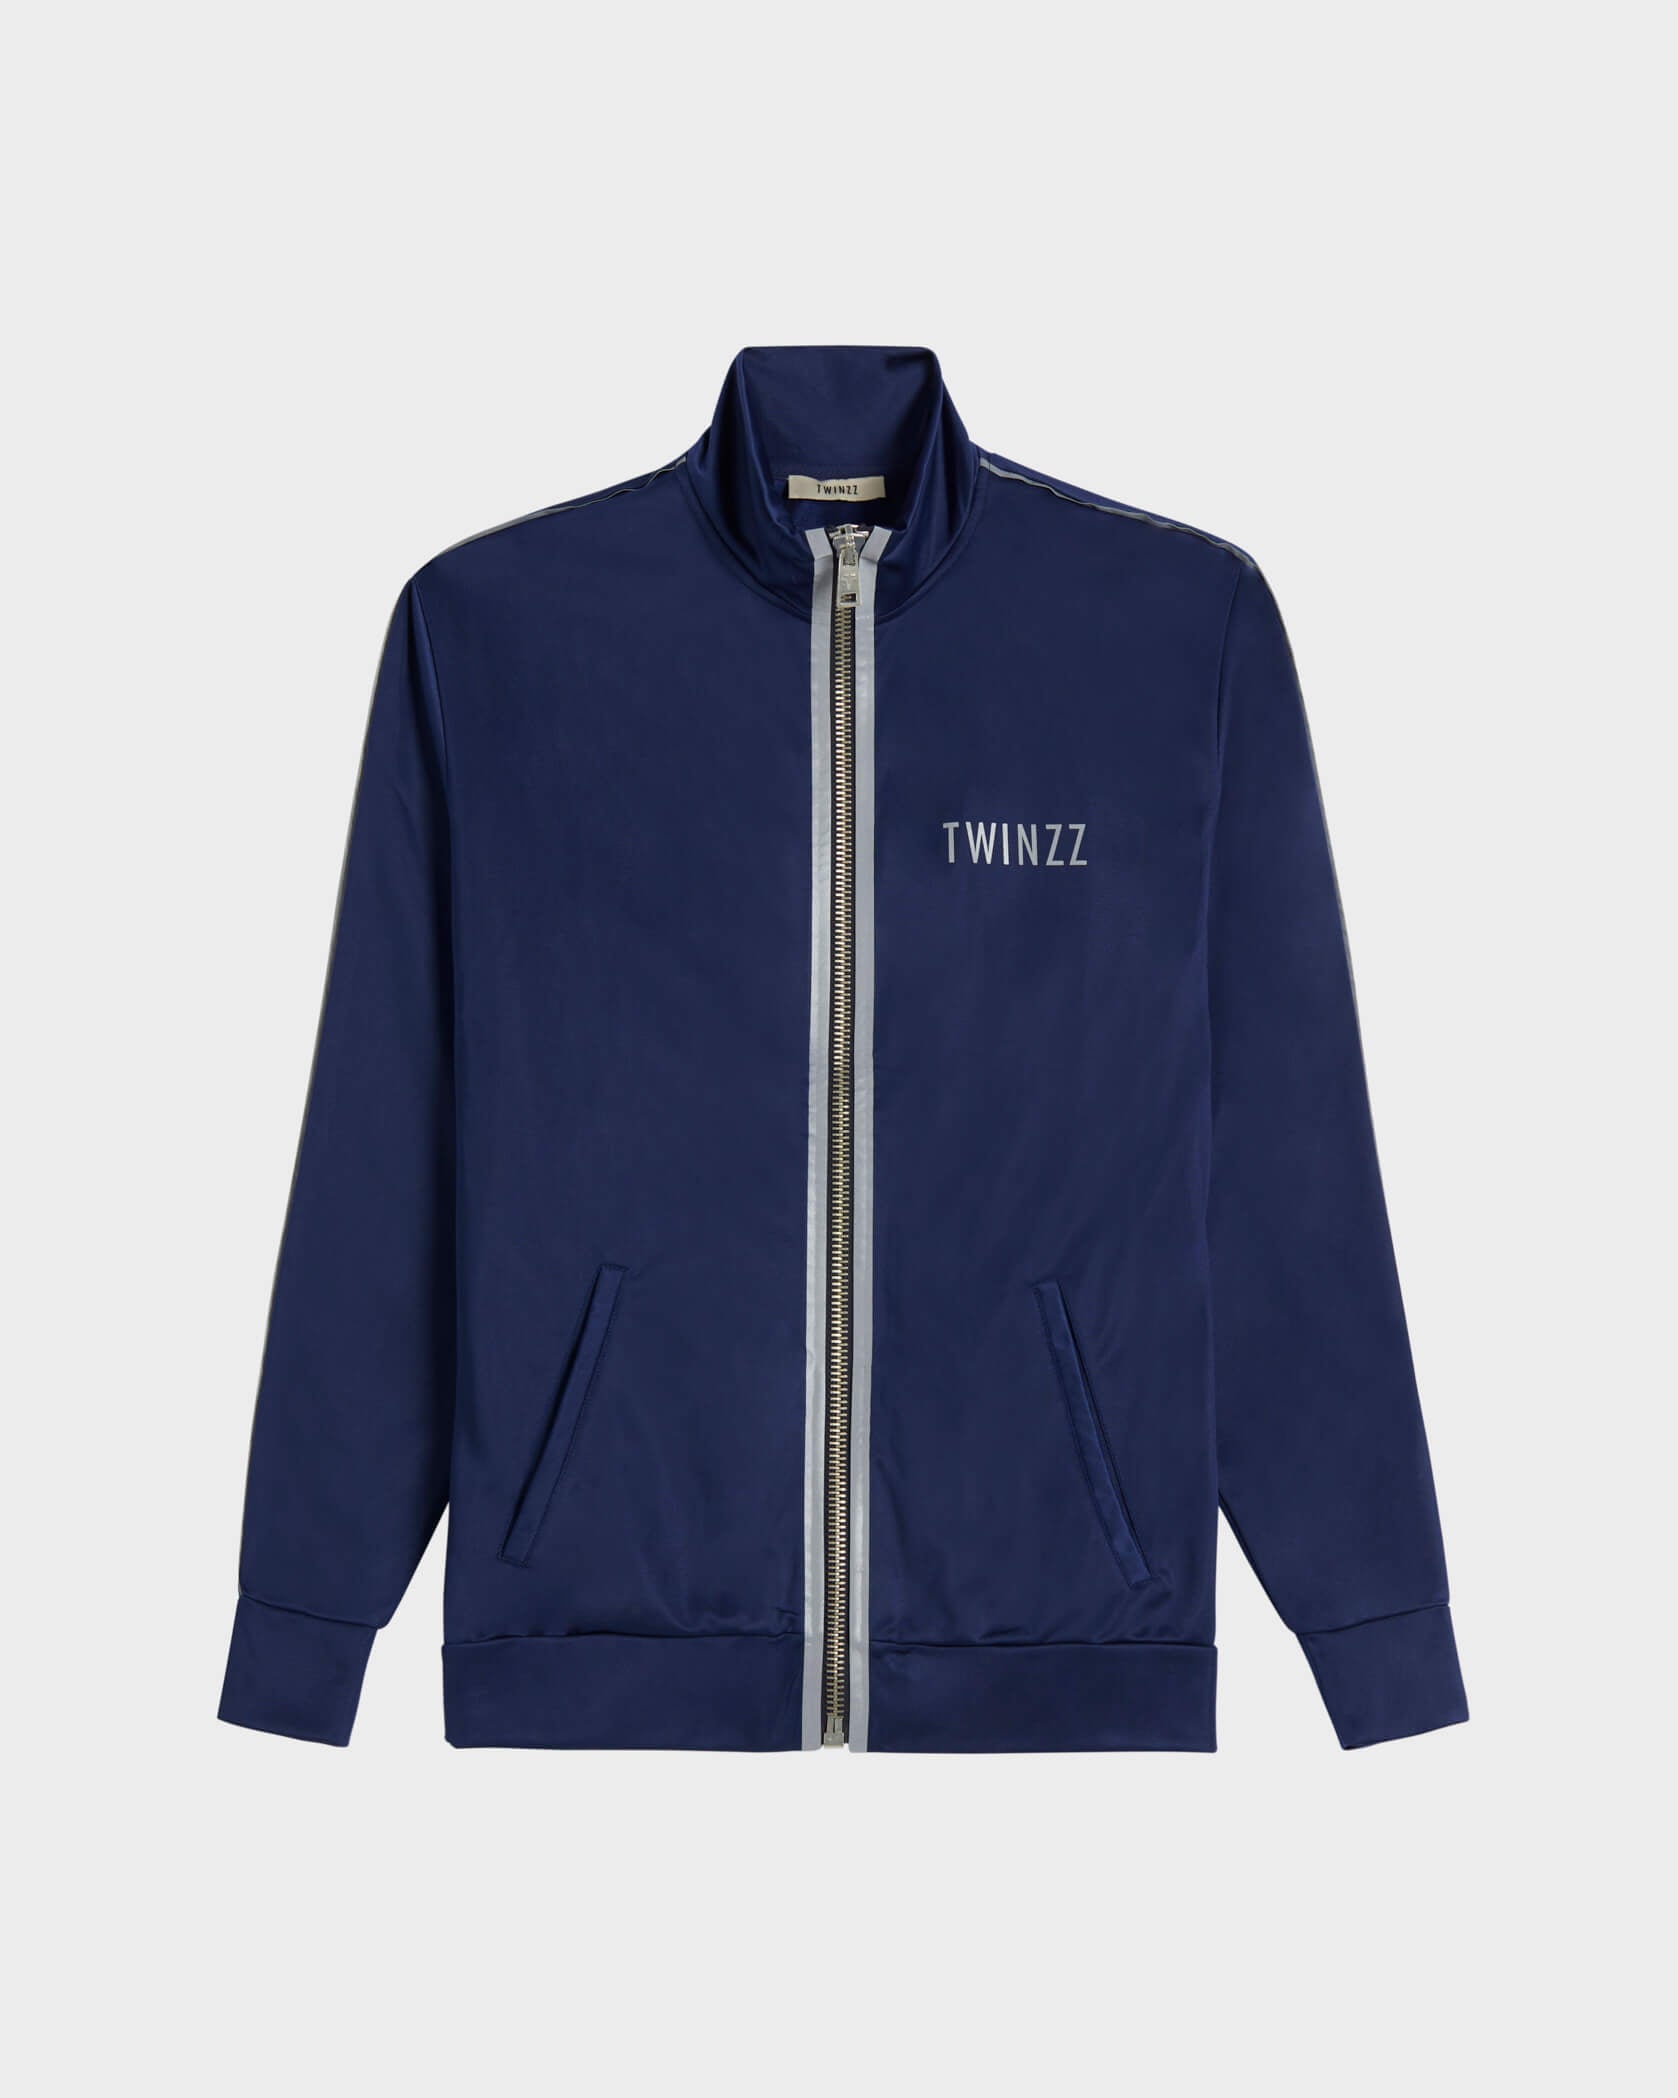 Twinzz Tech navy track jacket front